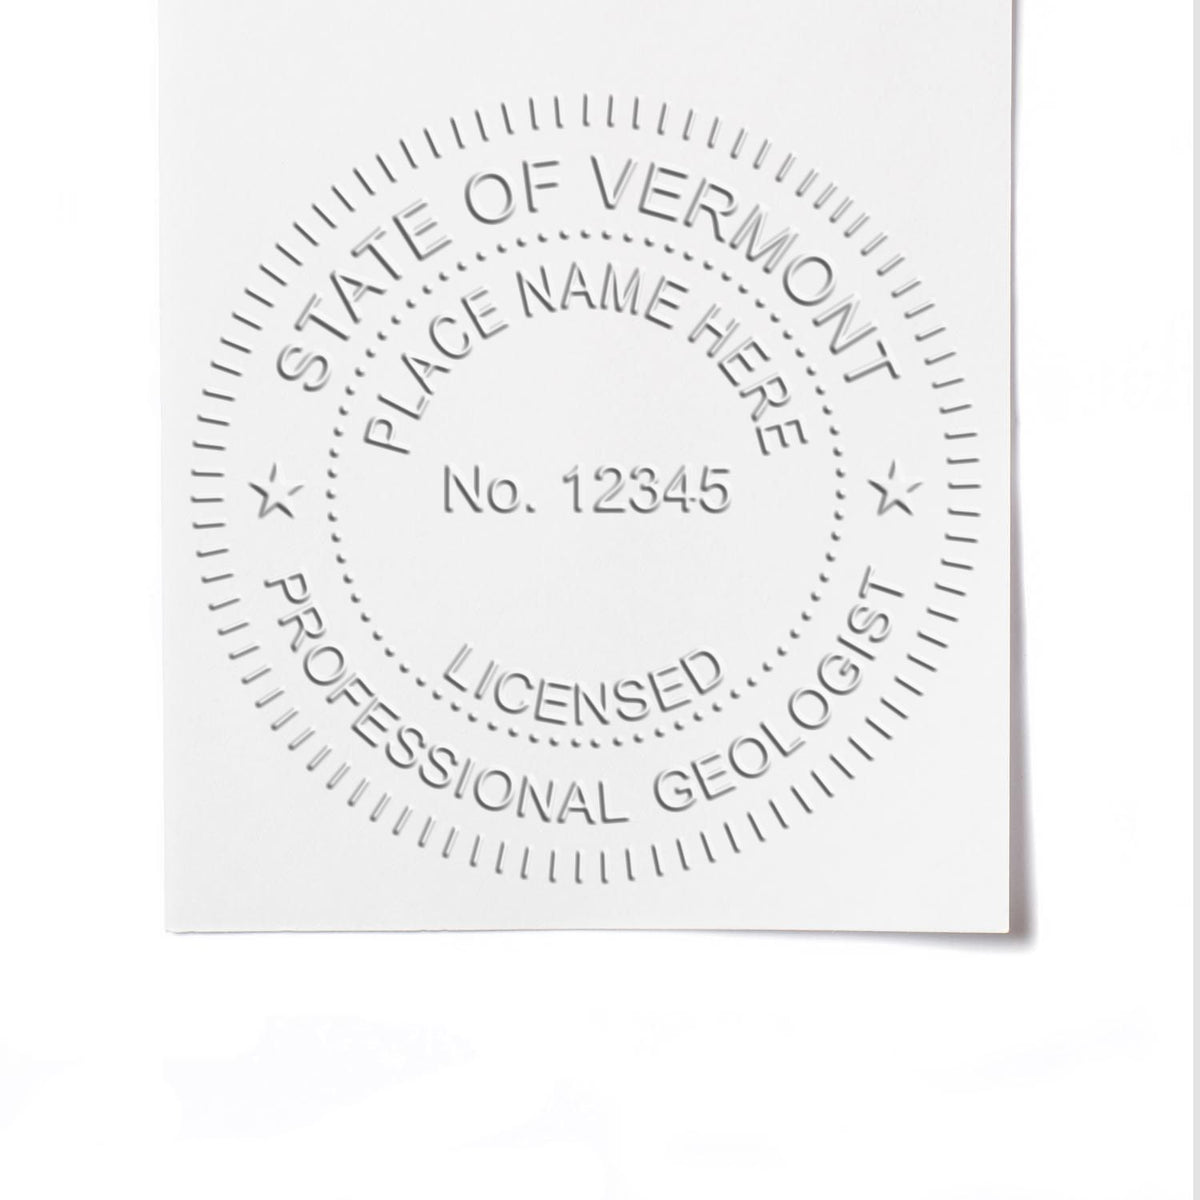 A photograph of the Gift Vermont Geologist Seal stamp impression reveals a vivid, professional image of the on paper.